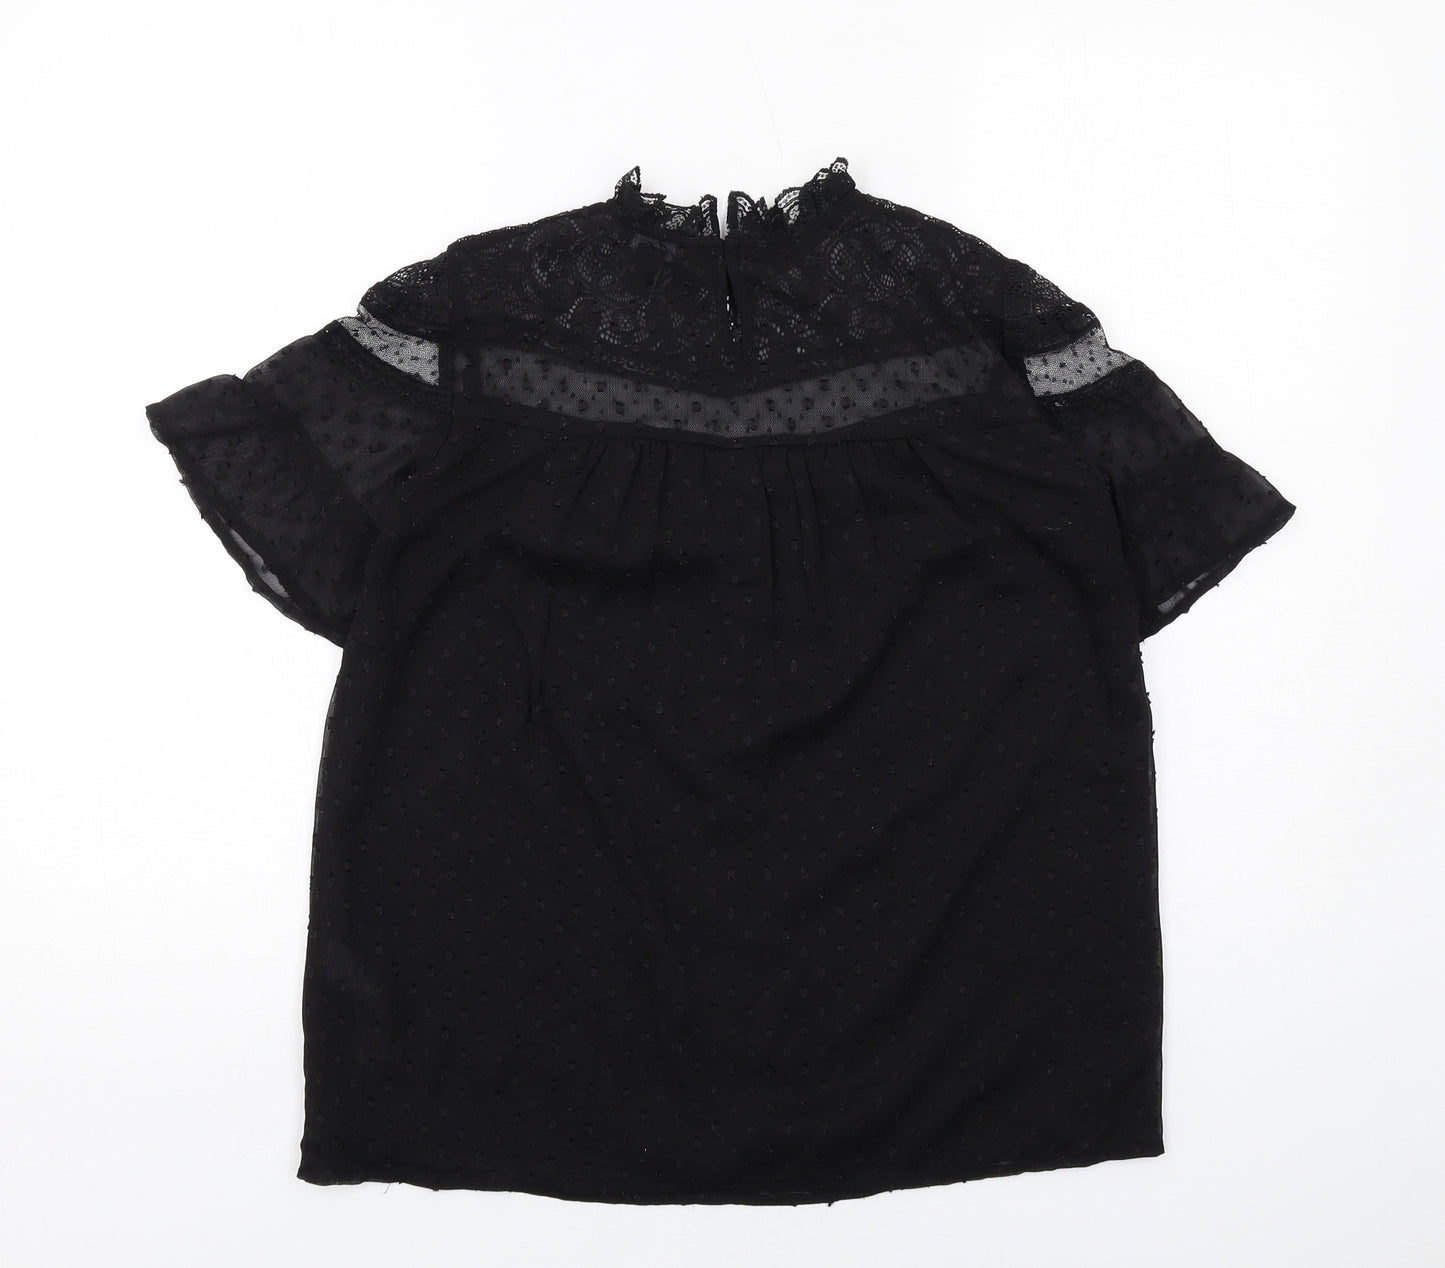 New Look Womens Black Polyester Basic Blouse Size 8 Mock Neck - Textured